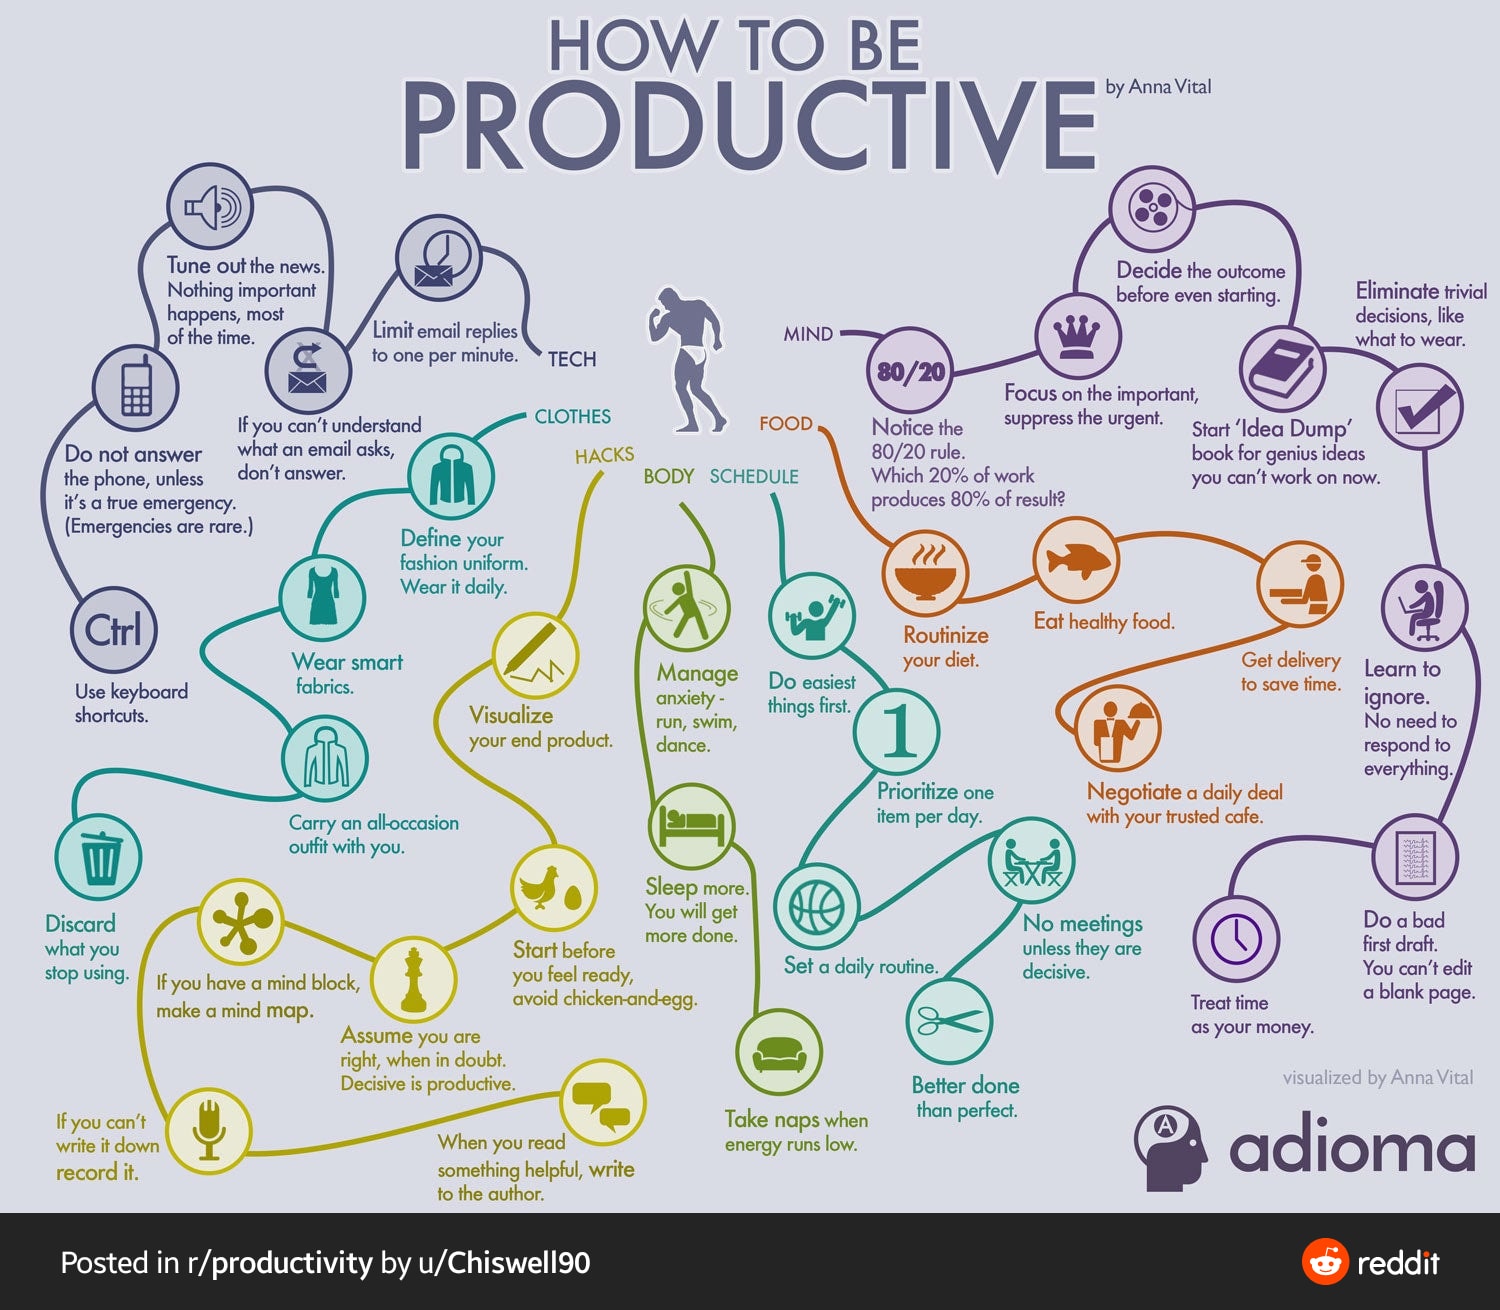 A guide to being productive.